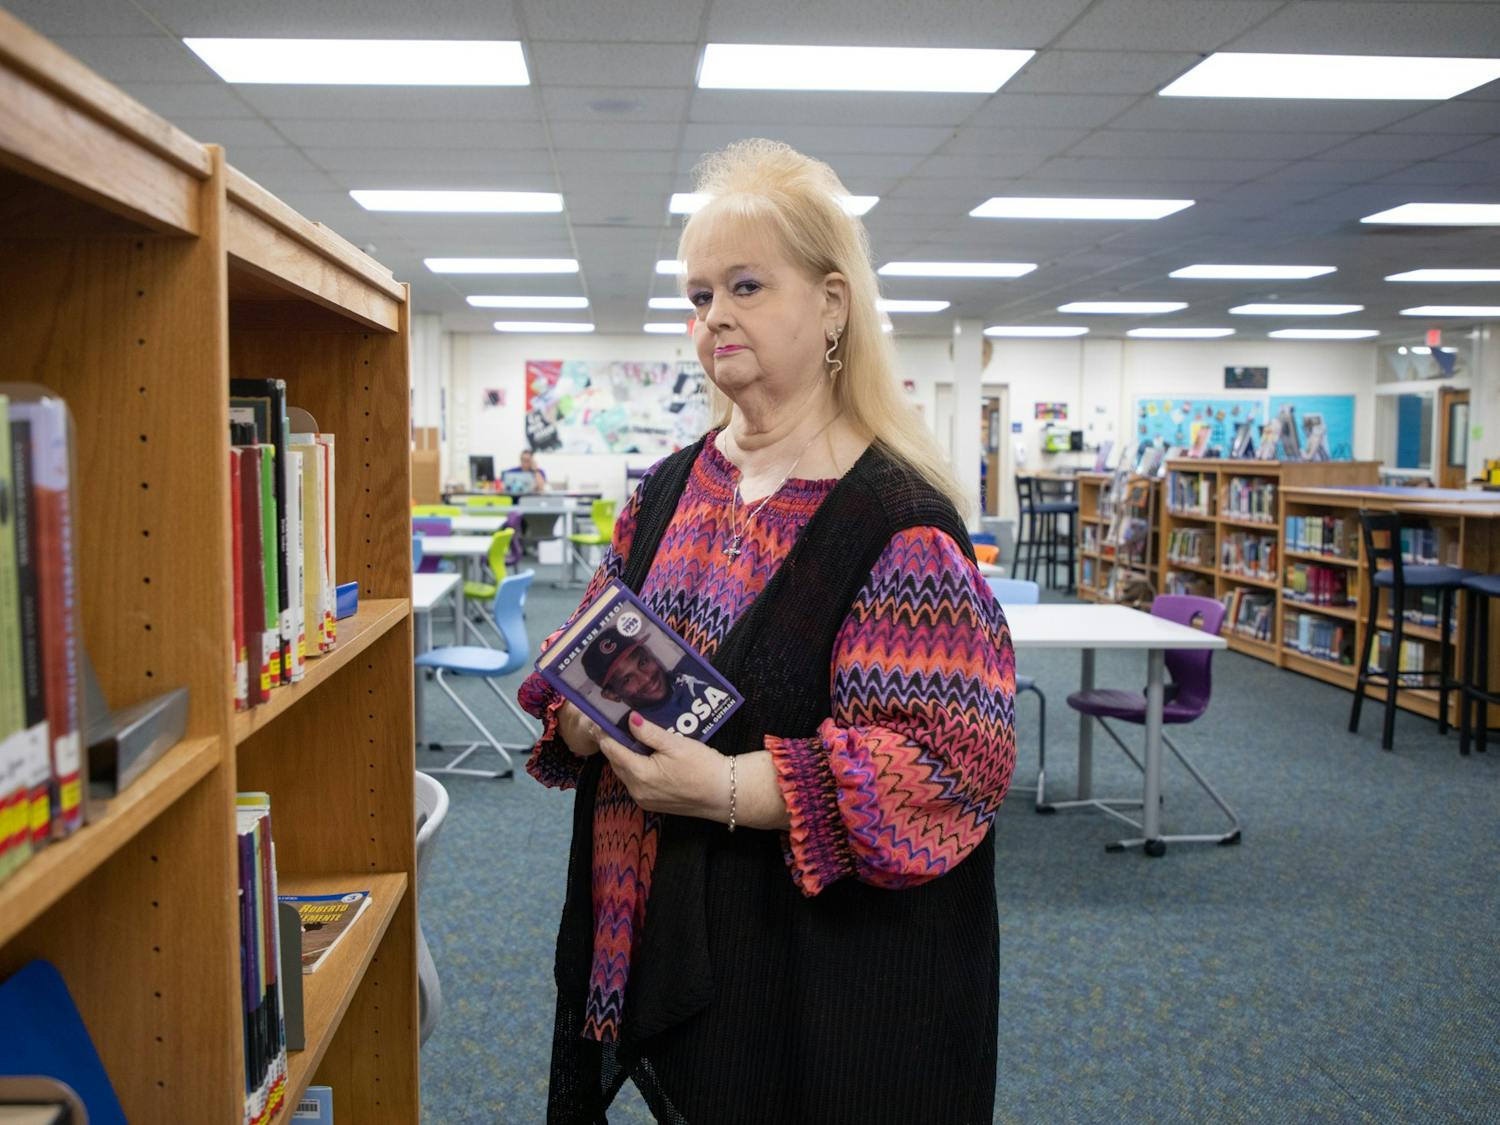 Kaye Martinez, librarian at Culbreth Middle School, poses for a picture in Culbreth's library on Sept. 2, 2022. This year will be Martinez's 36th at the school.